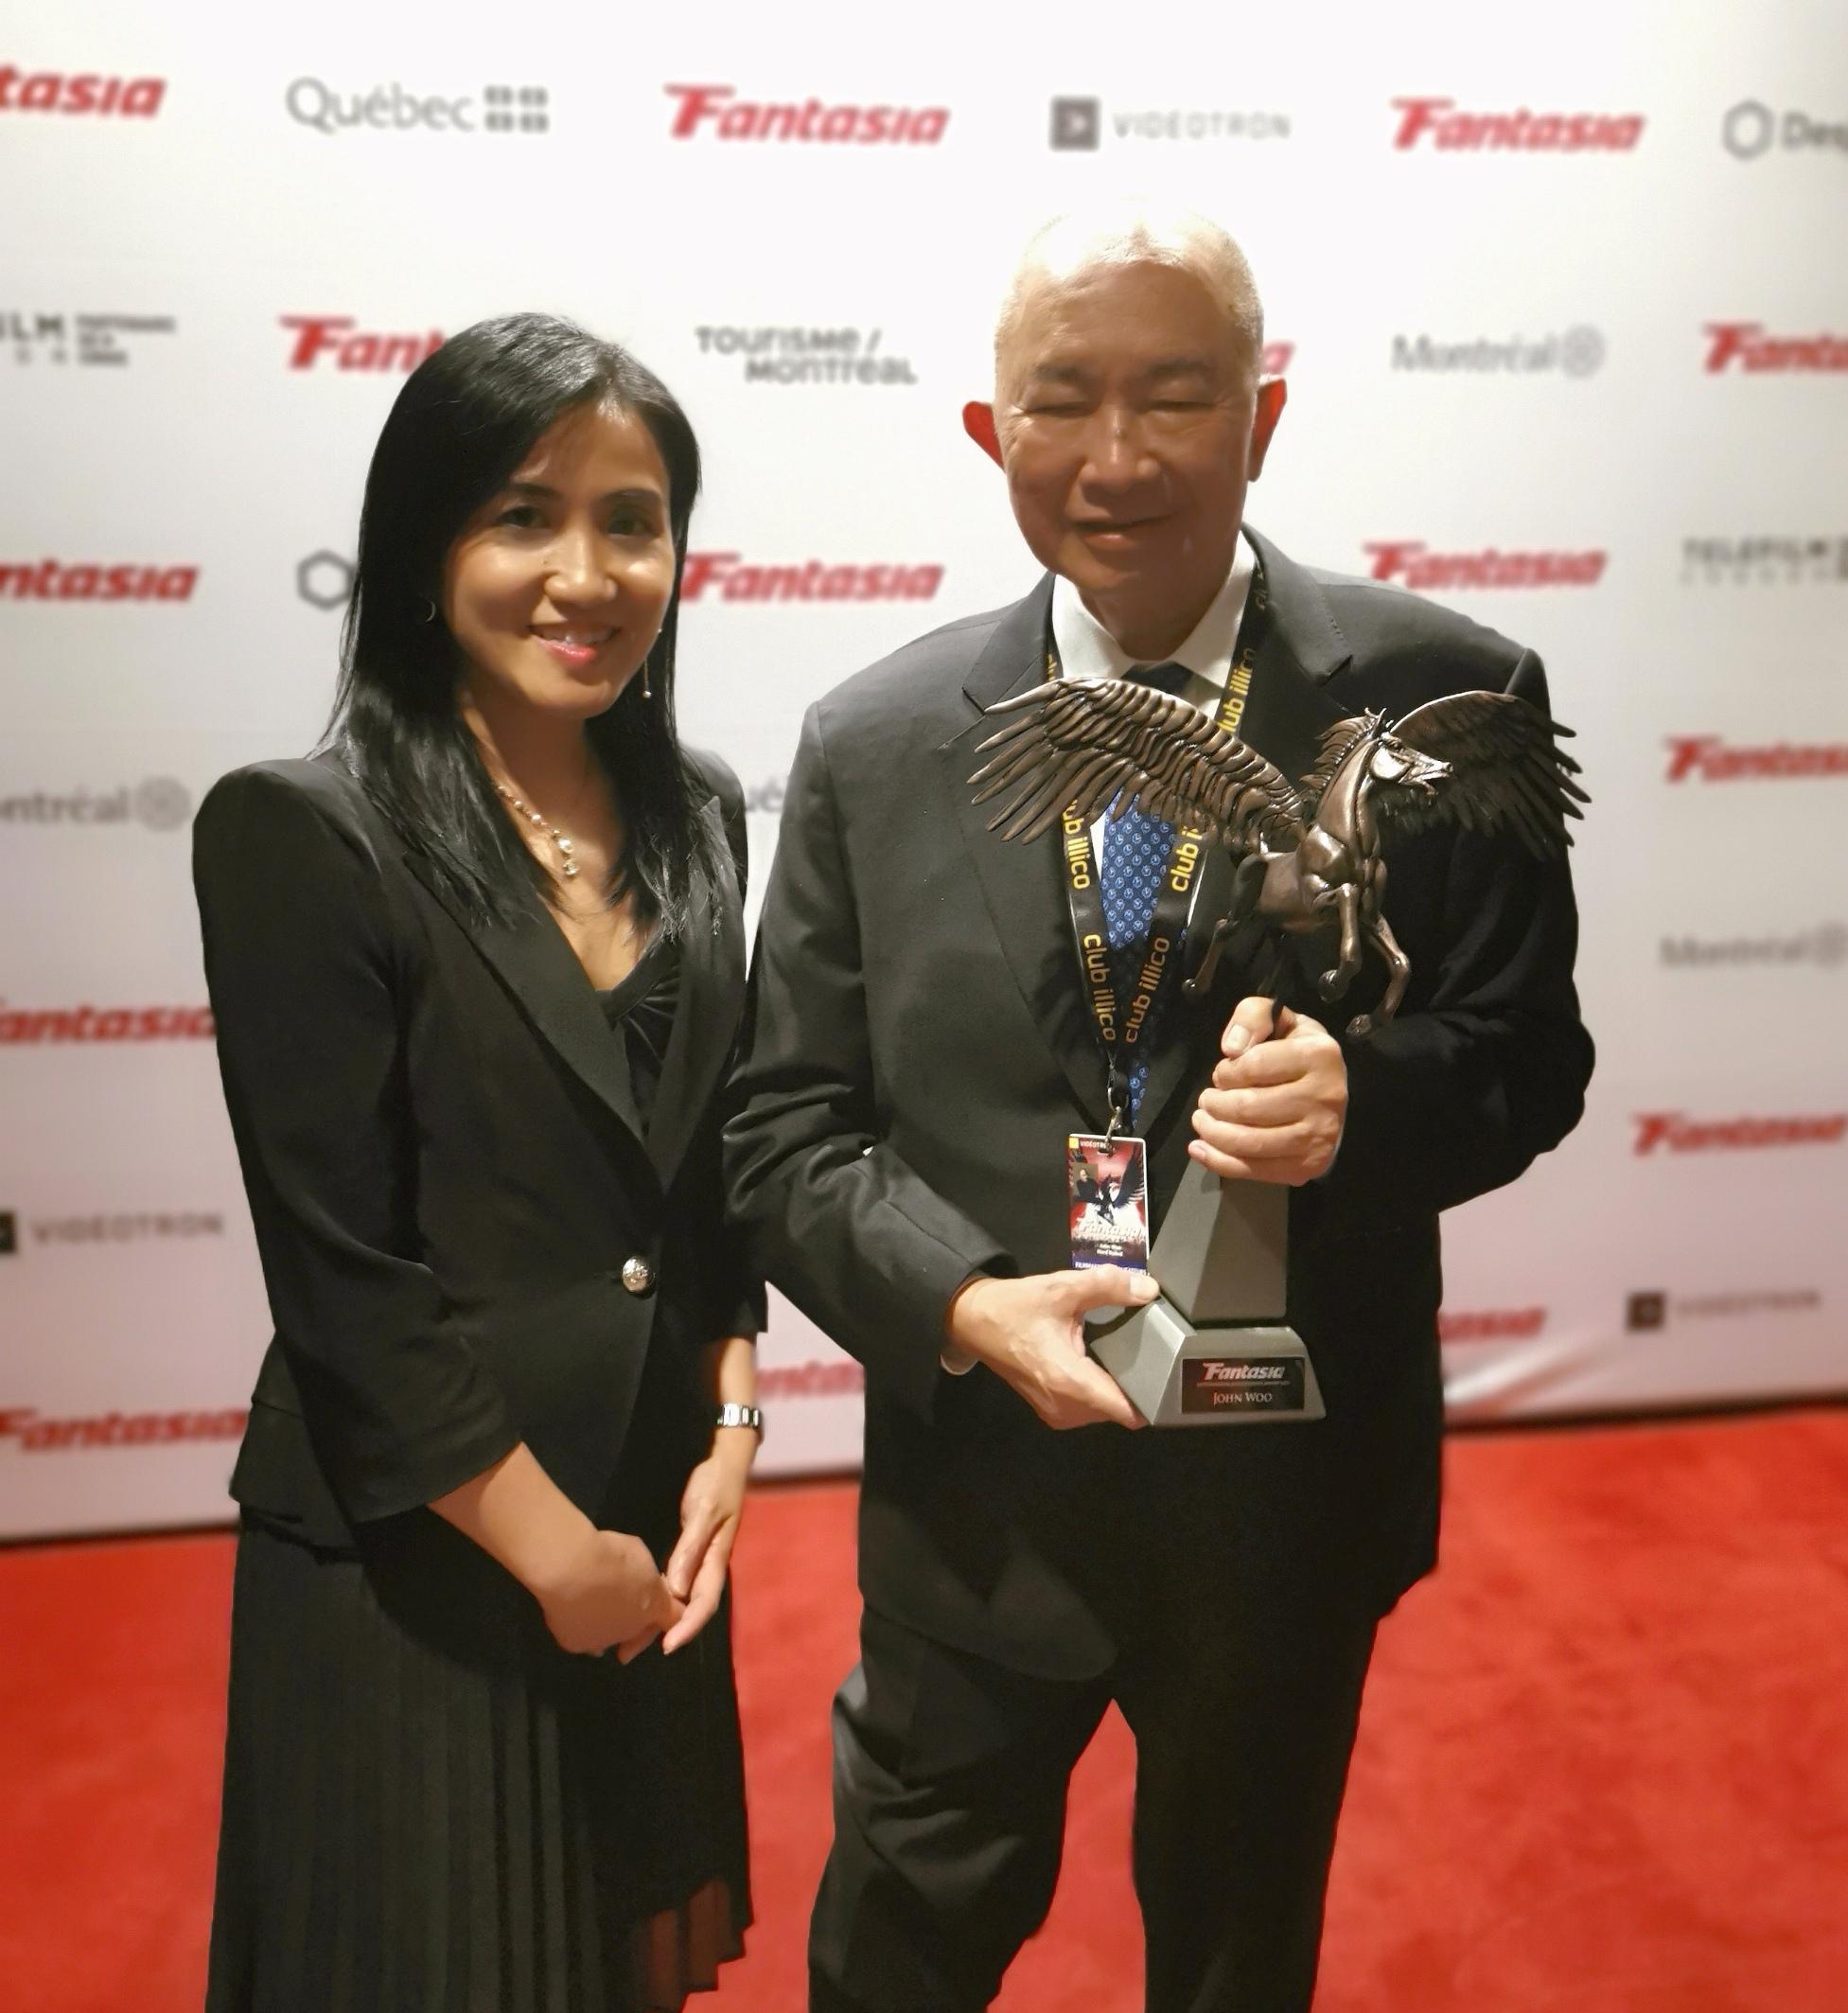 The Hong Kong Economic and Trade Office (Toronto) (Toronto ETO) supported the screening of seven Hong Kong films at the 26th Fantasia International Film Festival held from July 14 to August 3 in Montreal, Canada. Photo shows the Director of the Toronto ETO, Ms Emily Mo and Hong Kong Director, Mr John Woo with the "Career Achievement Award" presented by Fantasia International Film Festival on July 15 (Montreal time).